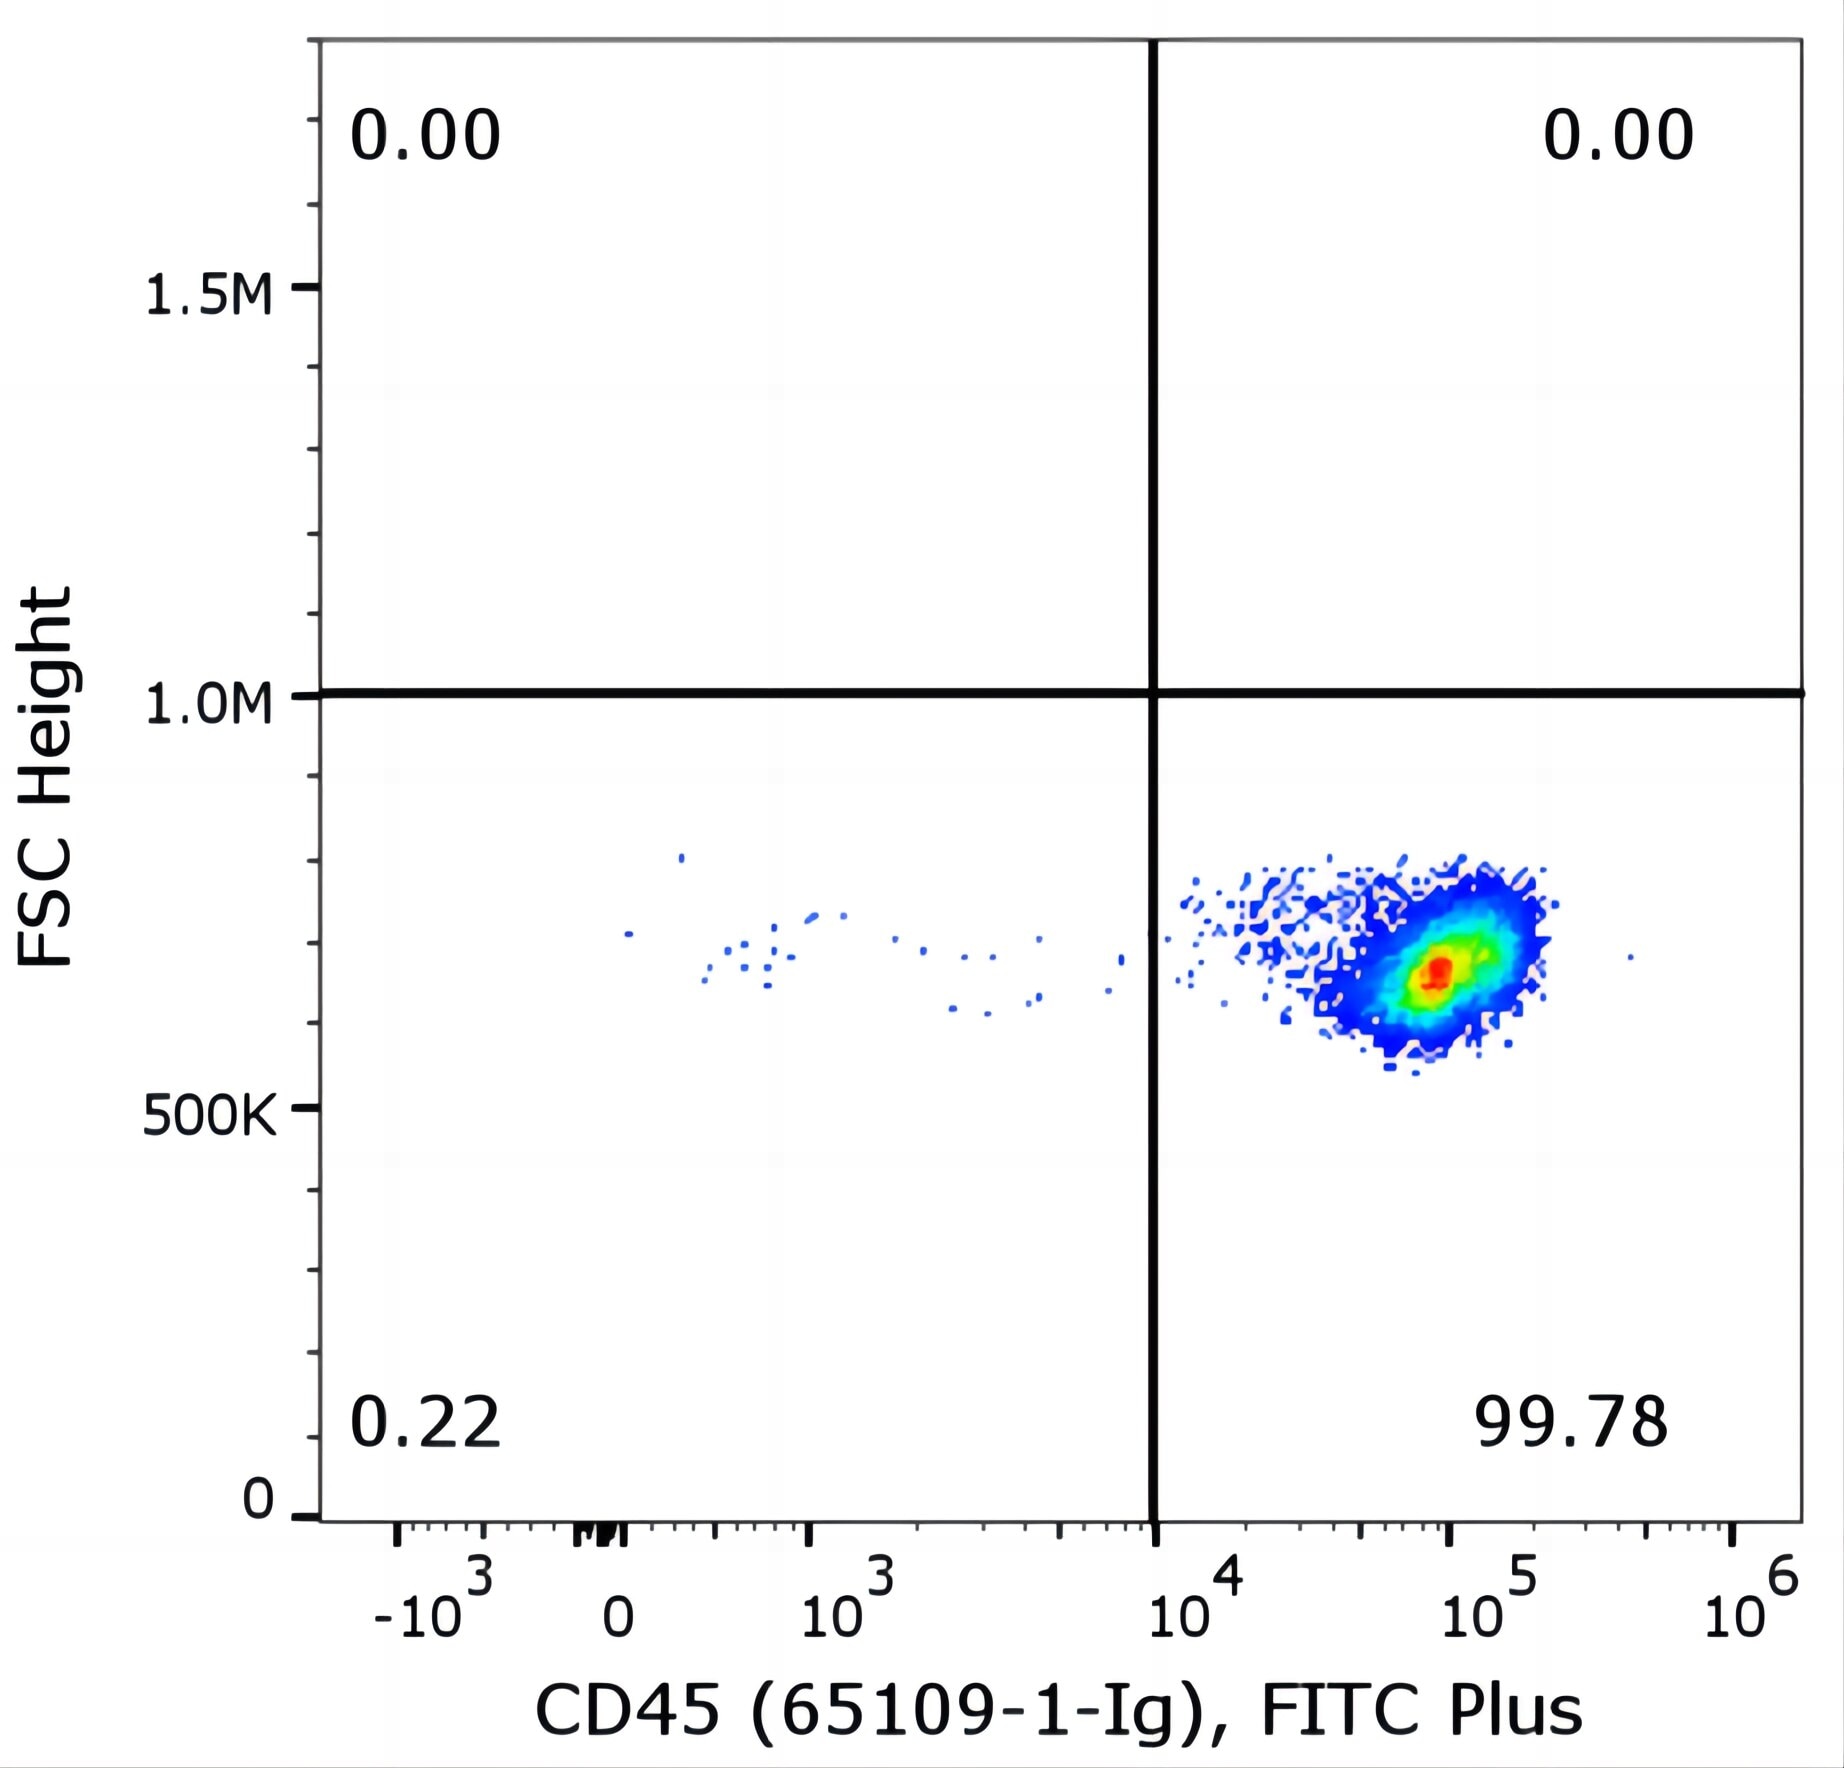 Flow cytometry of PBMC. 1X10^6 human peripheral blood mononuclear cells (PBMCs) were stained with anti-human CD45 antibody (clone HI30, 65109-1-Ig) labeled with FlexAble FITC Plus Kit (KFA028).